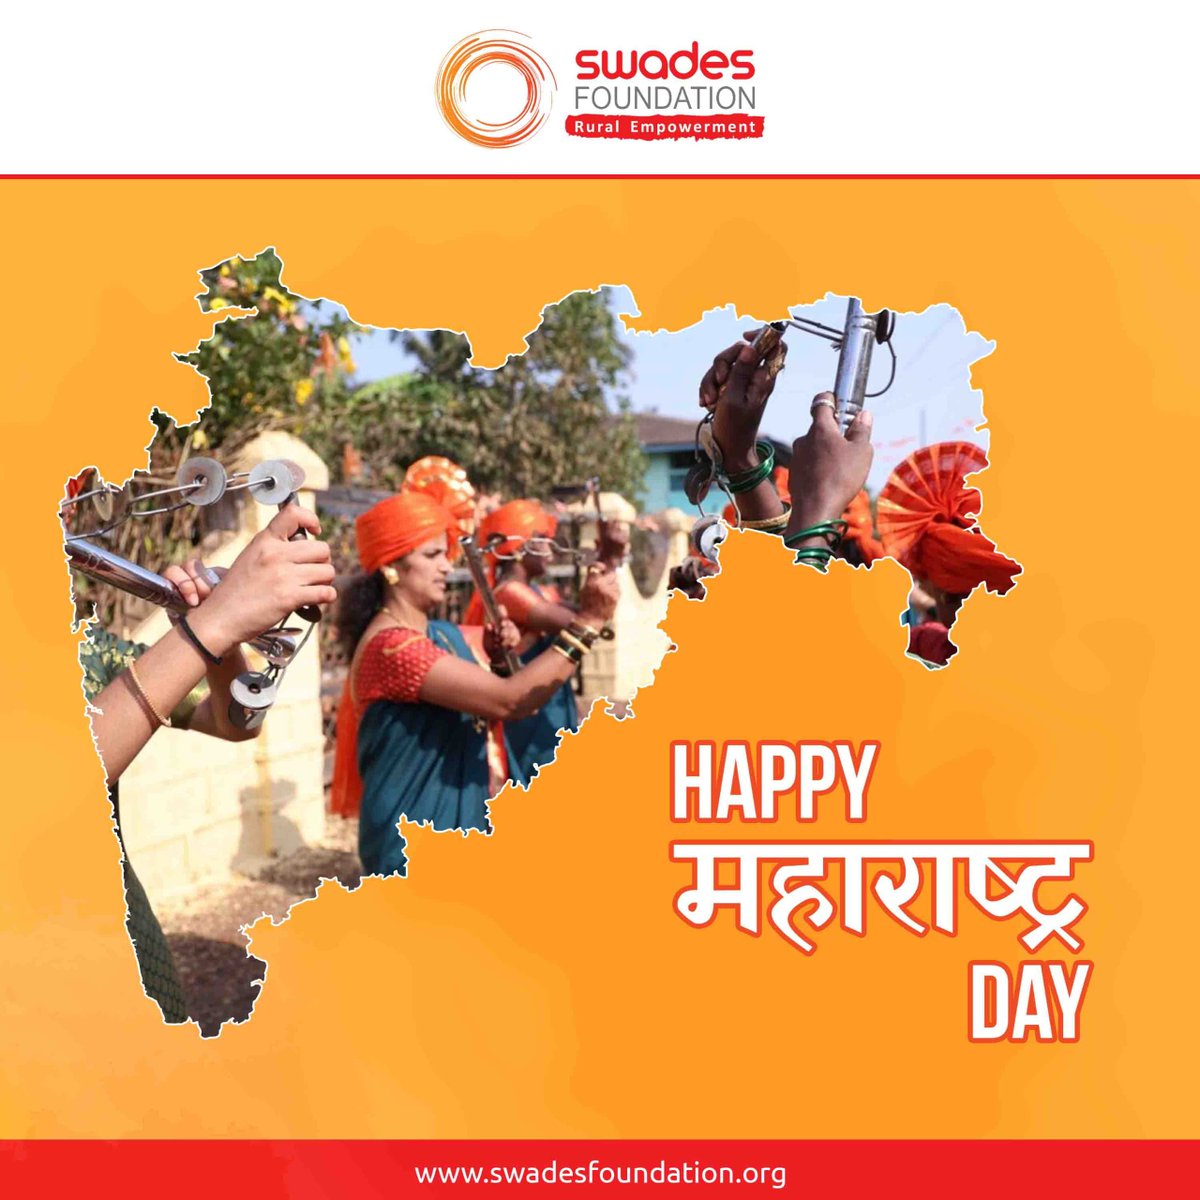 To everyone celebrating the culture, resilience, colour and spirit of this wonderful state. Wish you a very happy Maharashtra Diwas! #MaharashtraDay #Celebrate #India #NGO #Swades #RuralEmpowerment